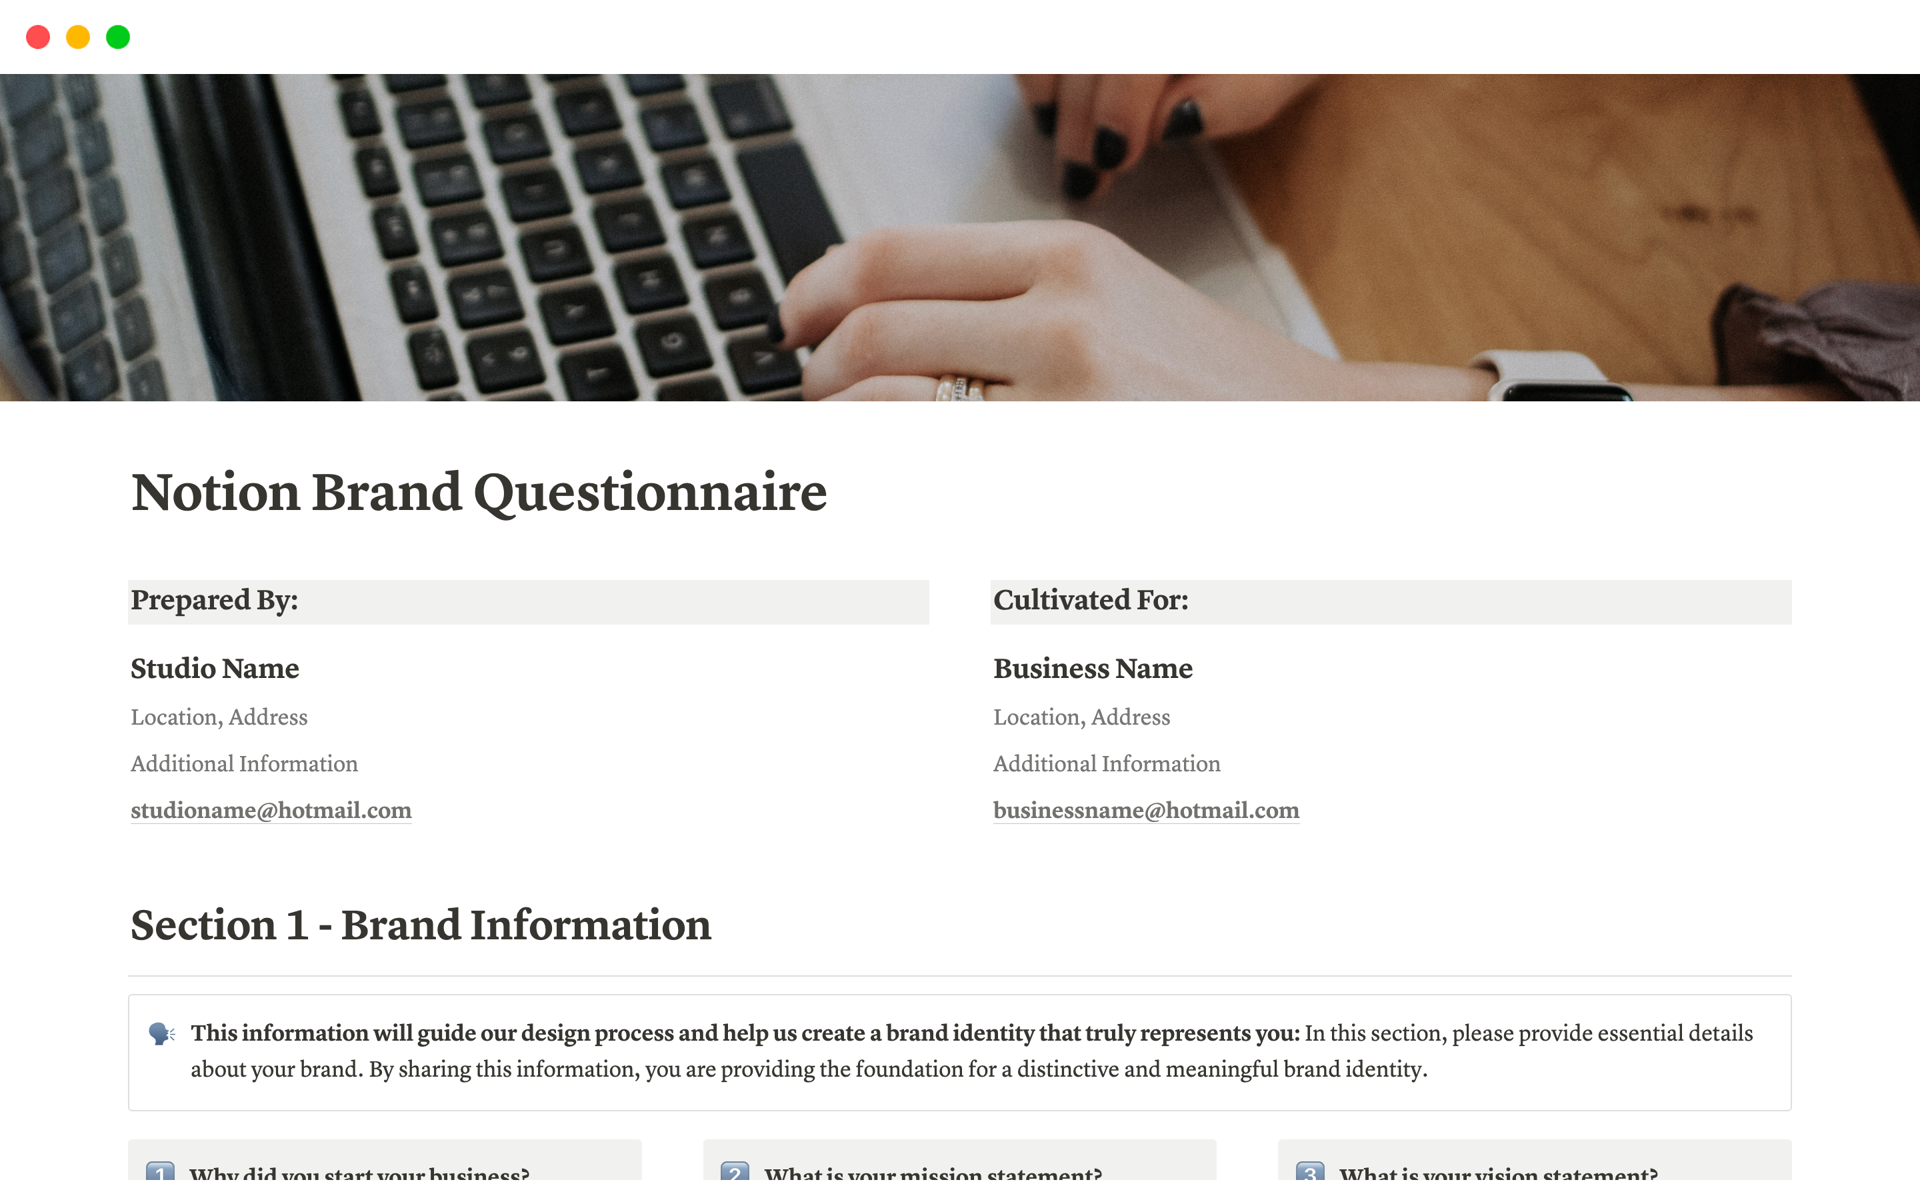 PRESENTING OUR BRAND QUESTIONNAIRE TEMPLATE FOR NOTION!